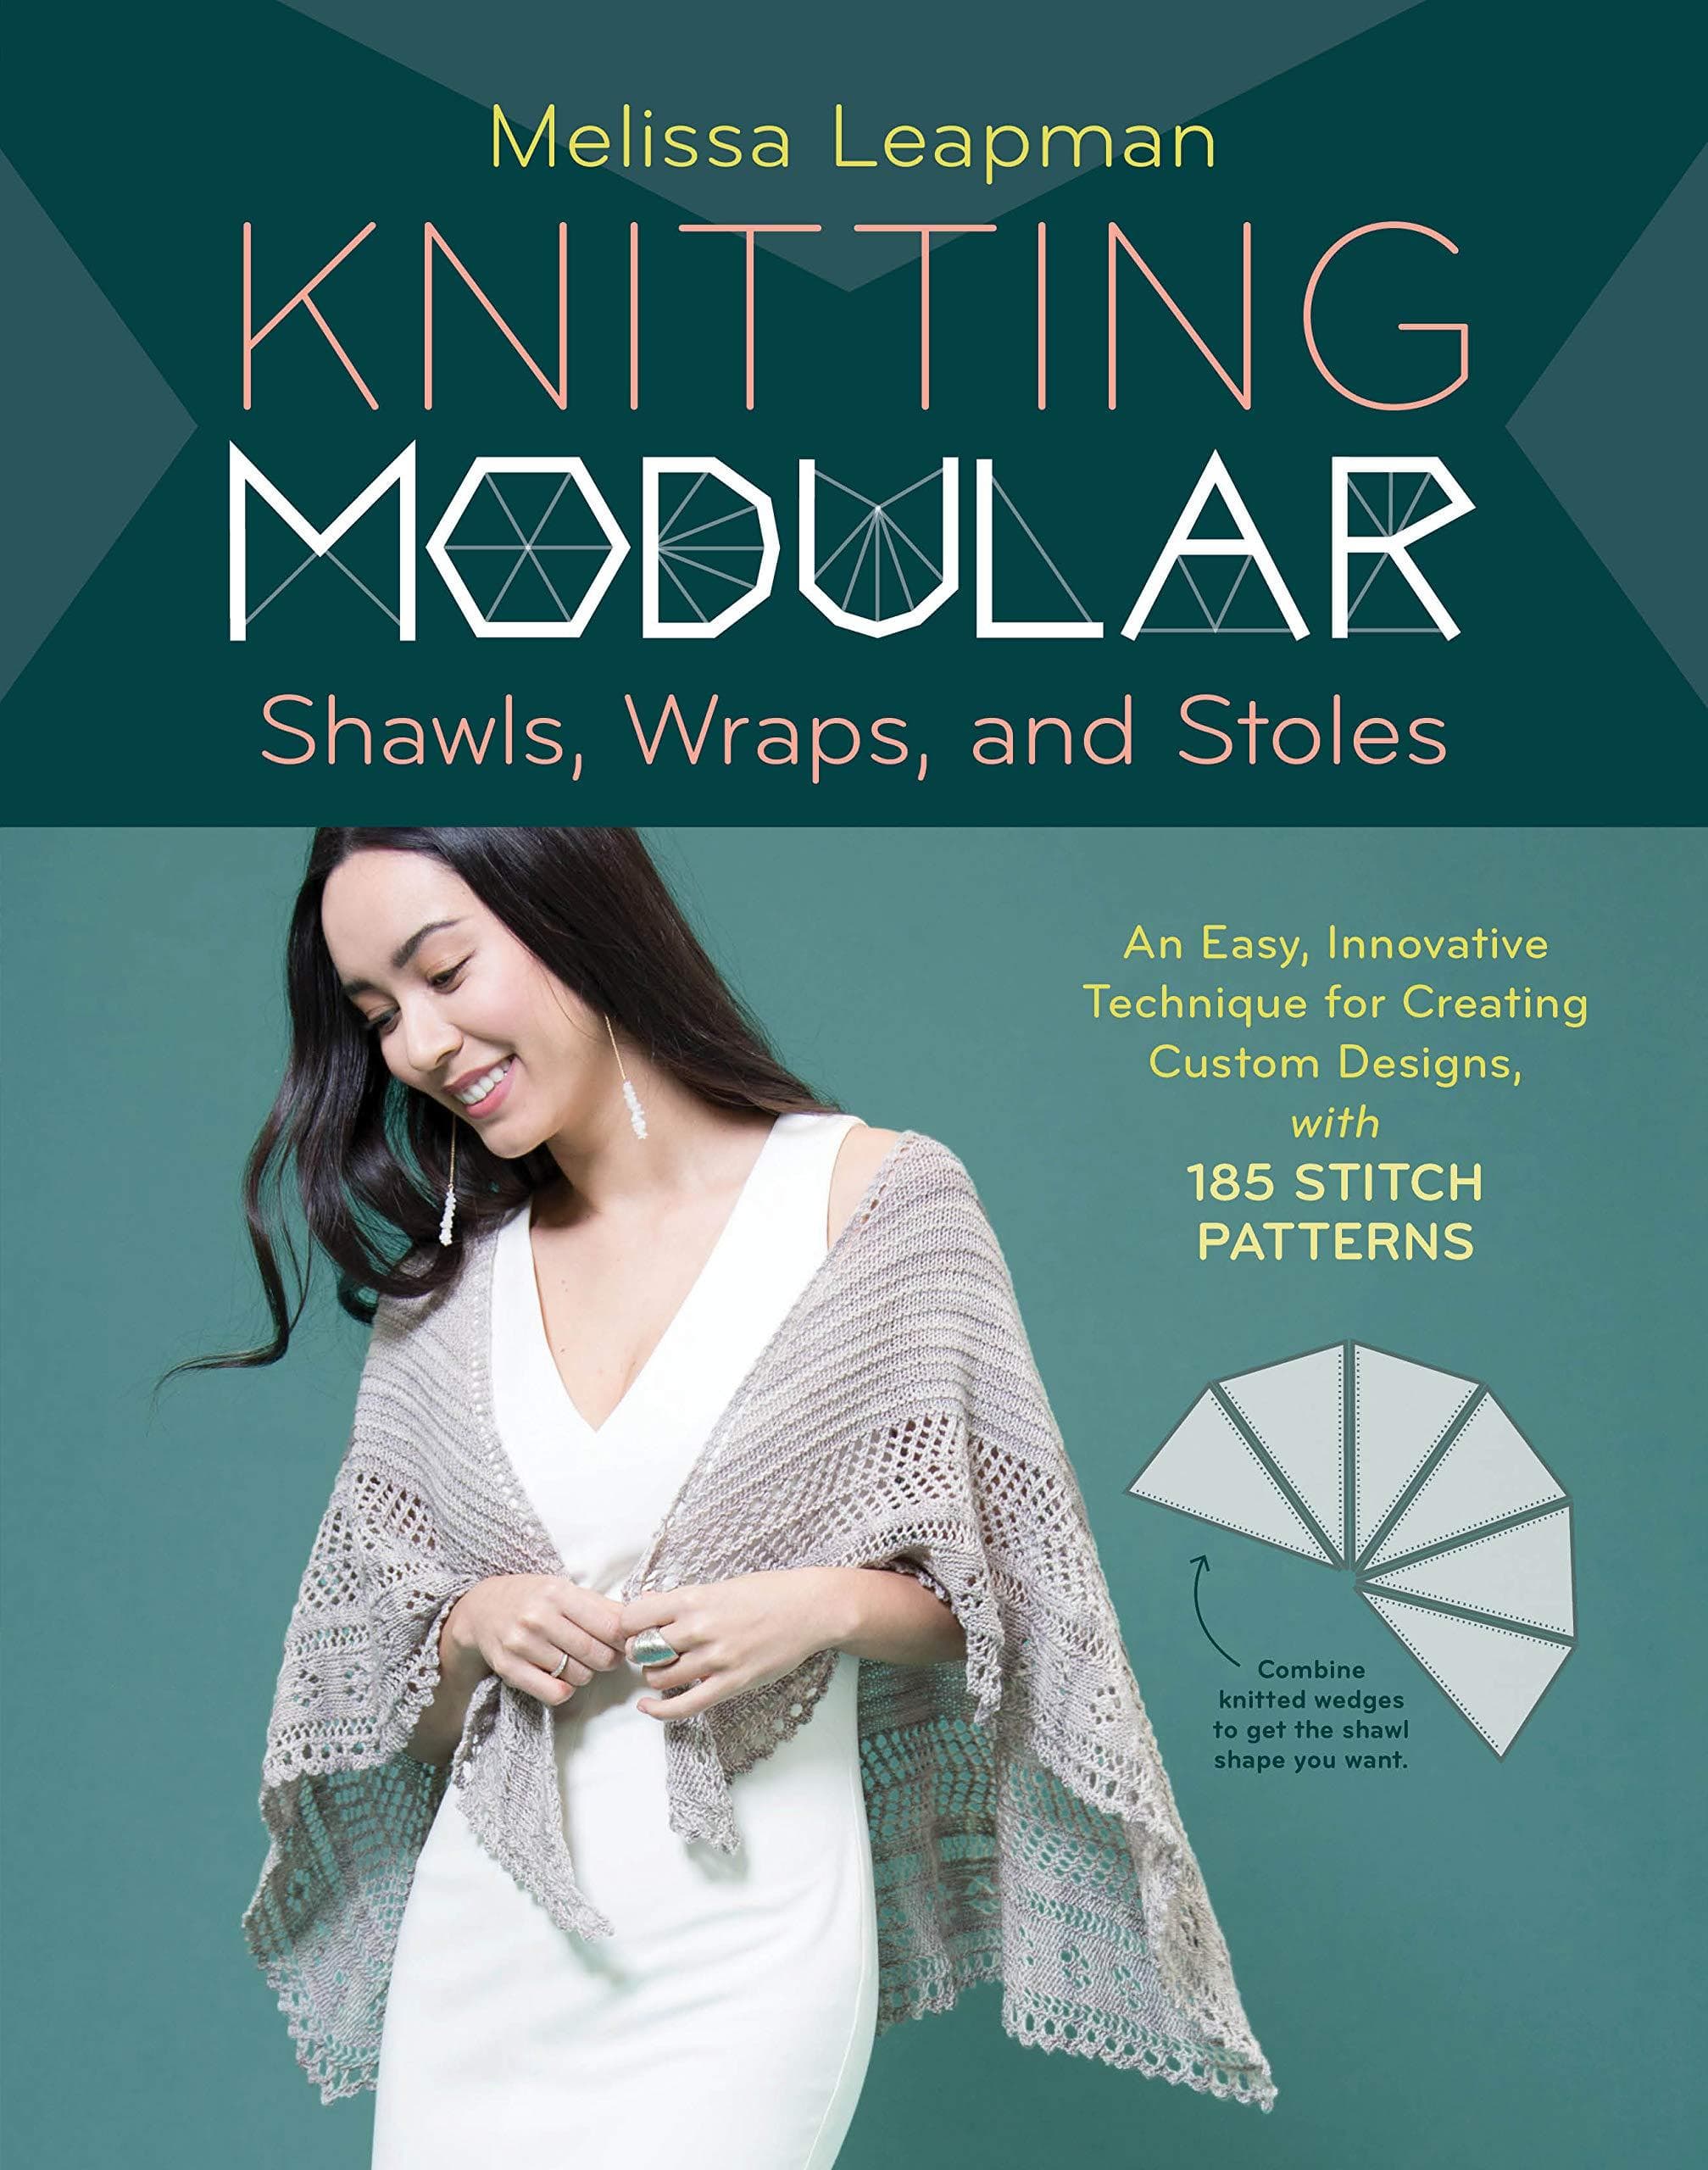 Knitting Modular Shawls, Wraps, and Stoles: An Easy, Innovative Technique for Creating Custom Designs, with 185 Stitch Patterns